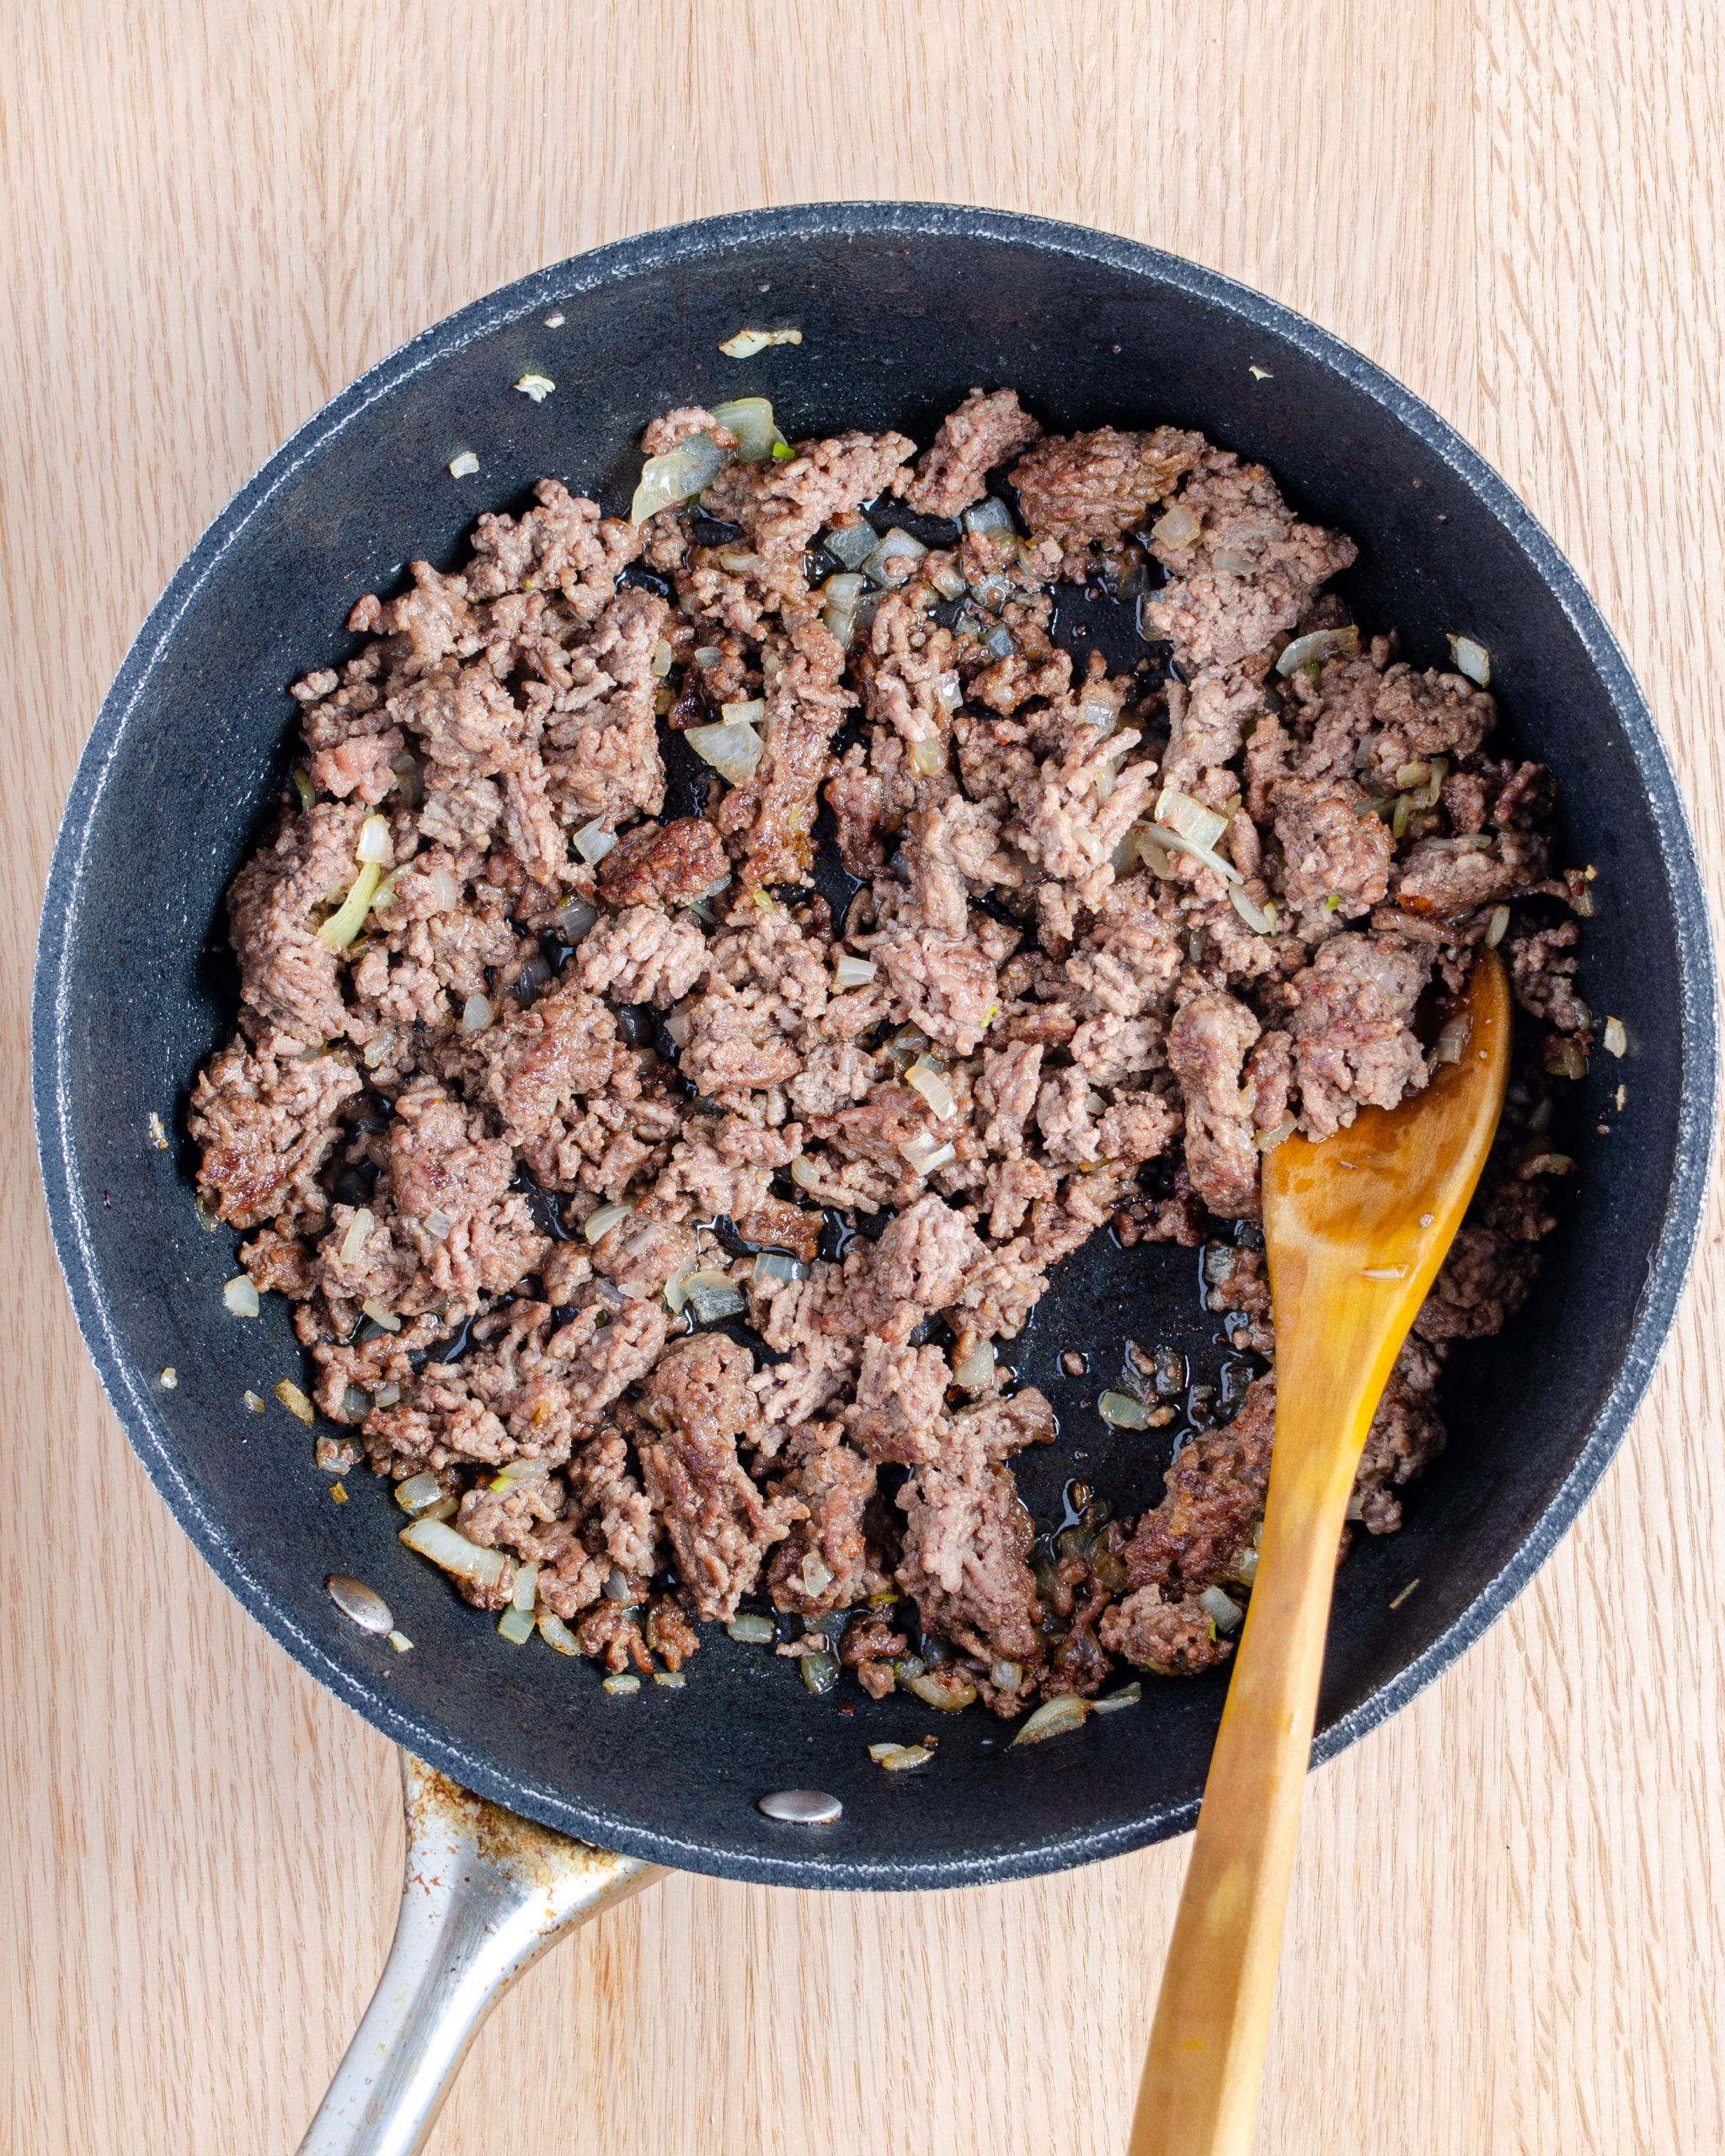 Add the ground beef and onion to a skillet over medium-high heat on the stove, and cook until the meat is browned and onions have softened. Drain any excess grease.